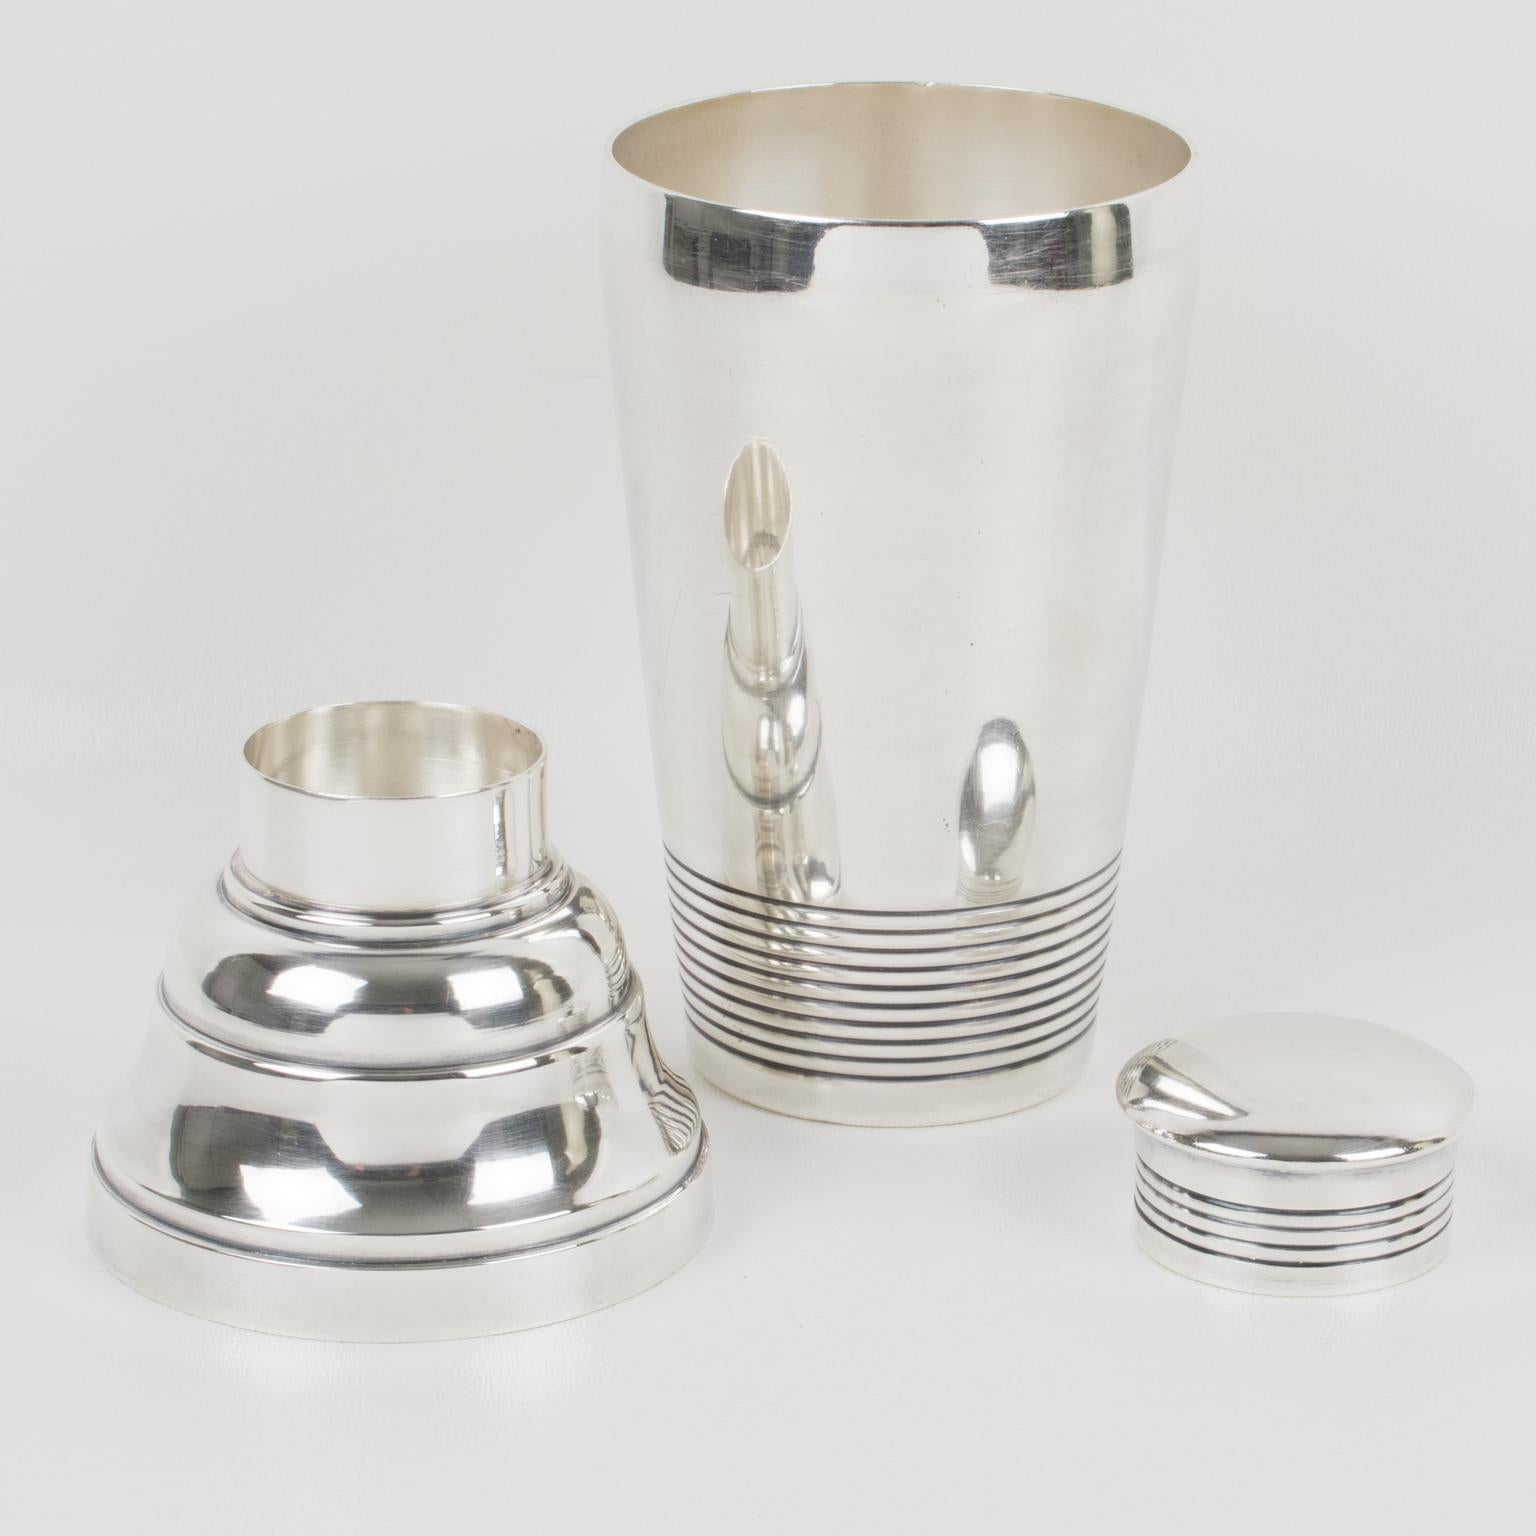 Elegant French Art Deco silver plate cylindrical cocktail or Martini Shaker by silversmith Ets Boyer et Fils, Paris. Three sectioned designed cocktail Shaker with removable CAP and strainer. Lovely Art Deco flair with geometric design. Marked